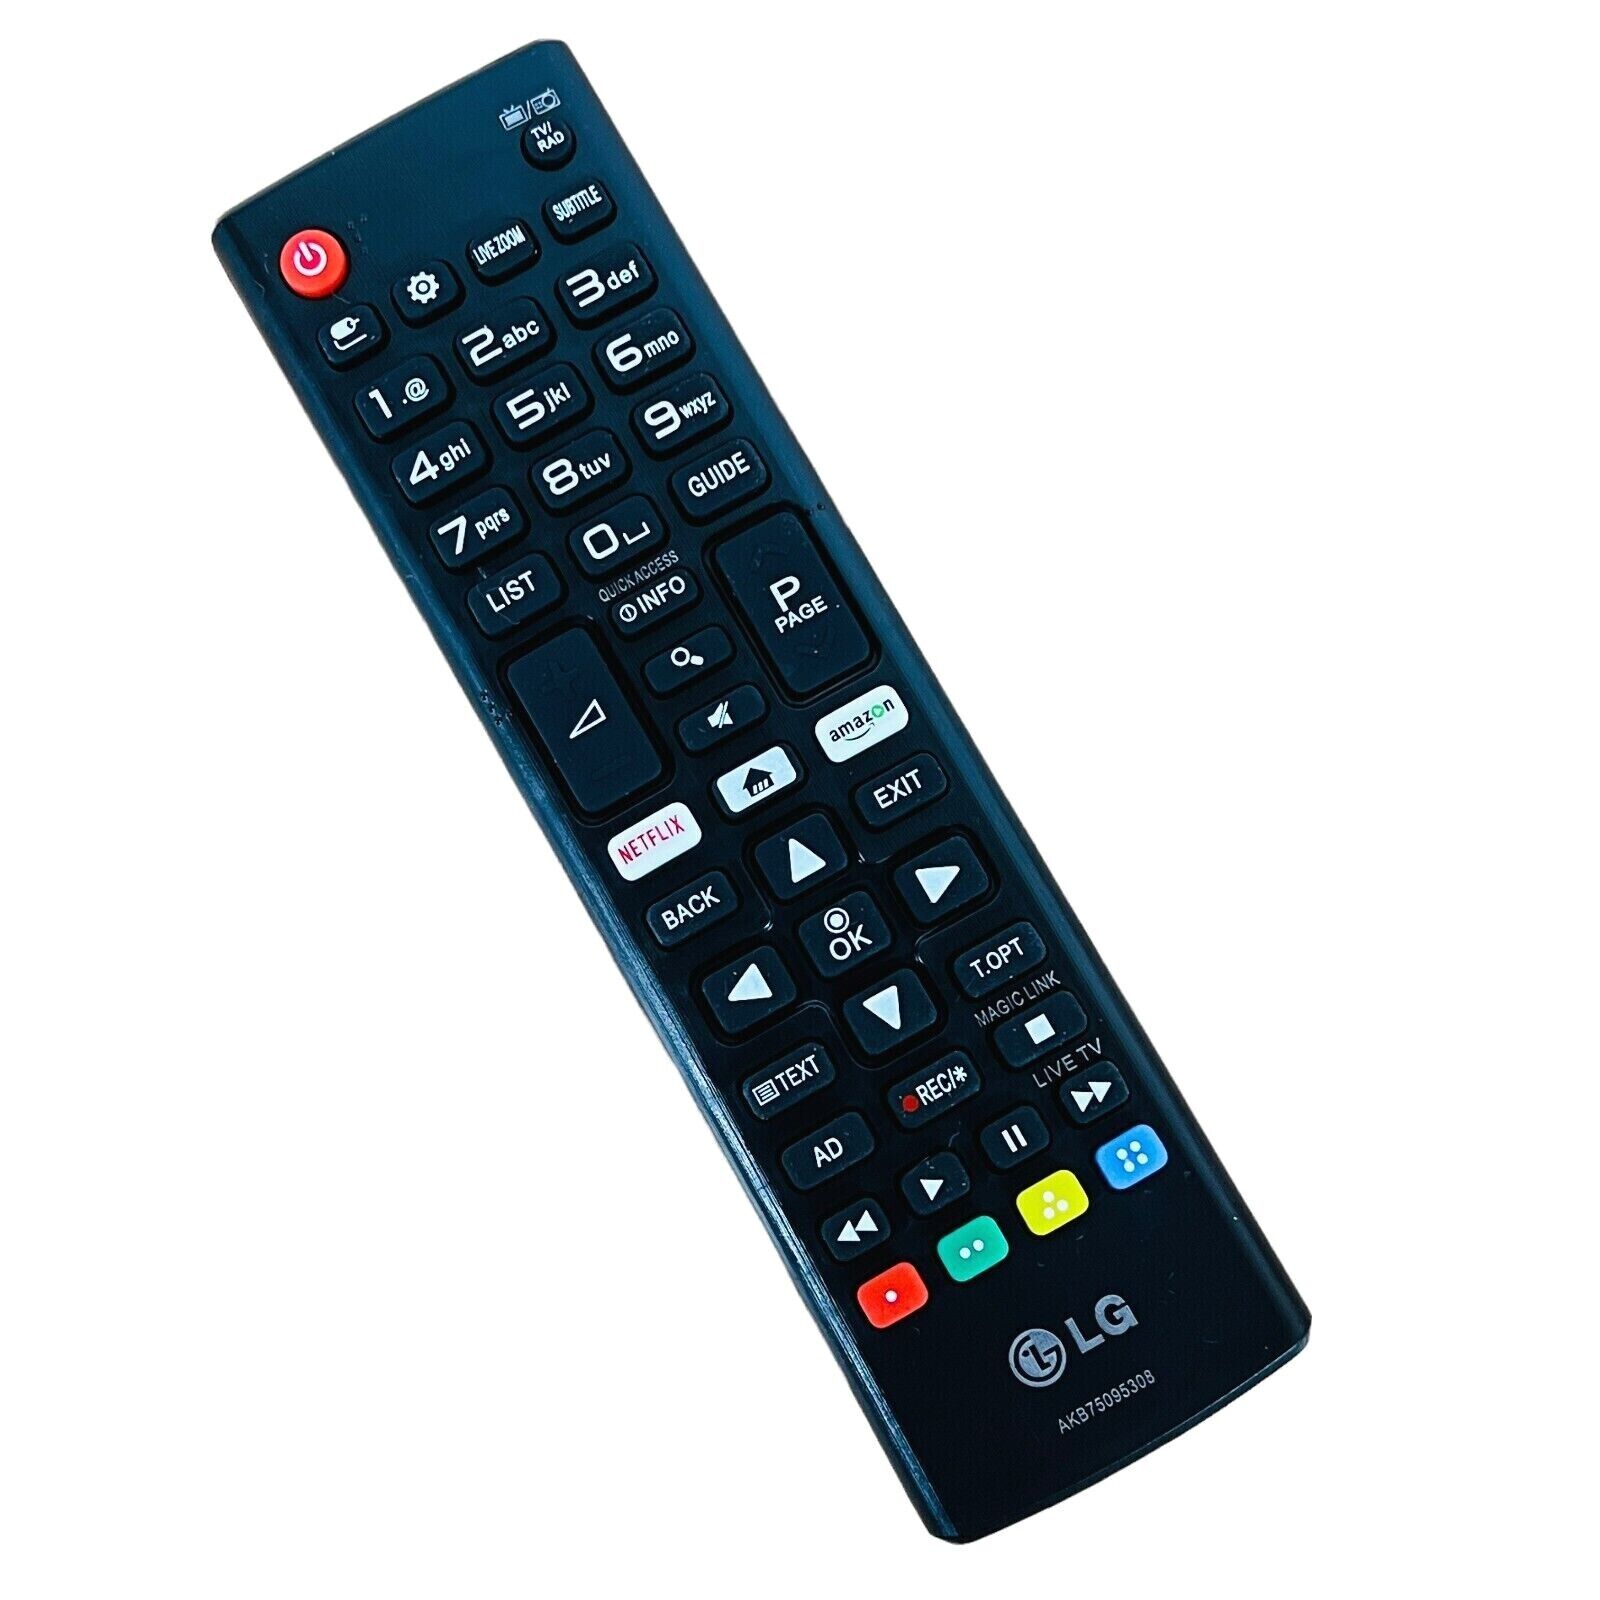 LG AKB75095308 TV Remote Control For 43UJ6309 55UK64 Black - Has Been Tested